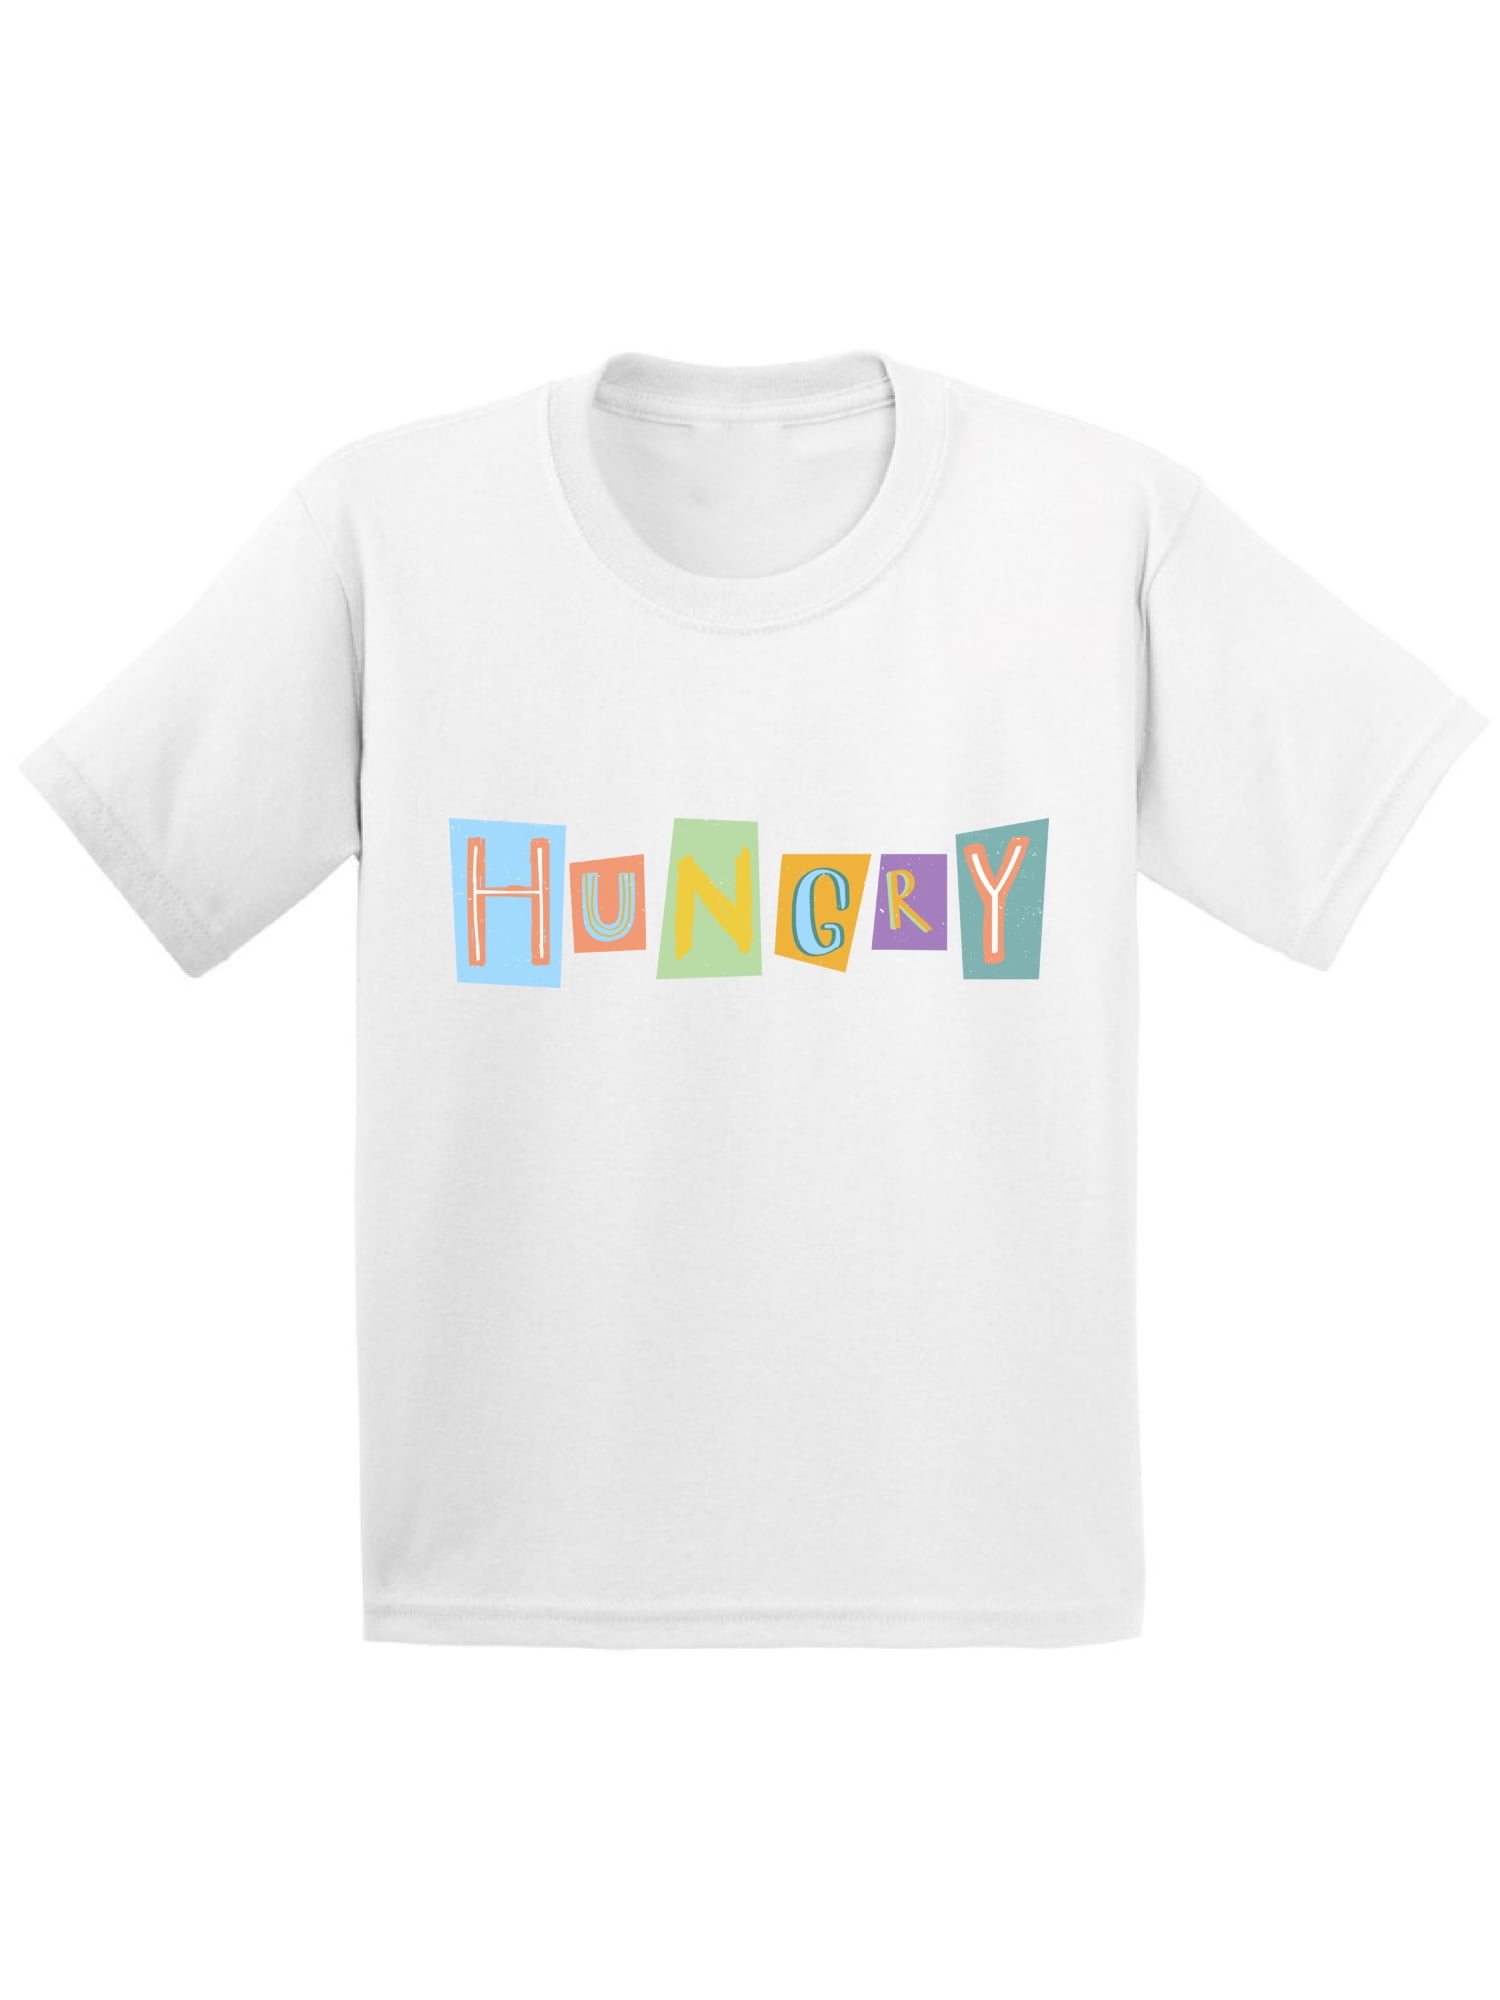 Boys Graphic Tees - Funny Hungry Shirt 